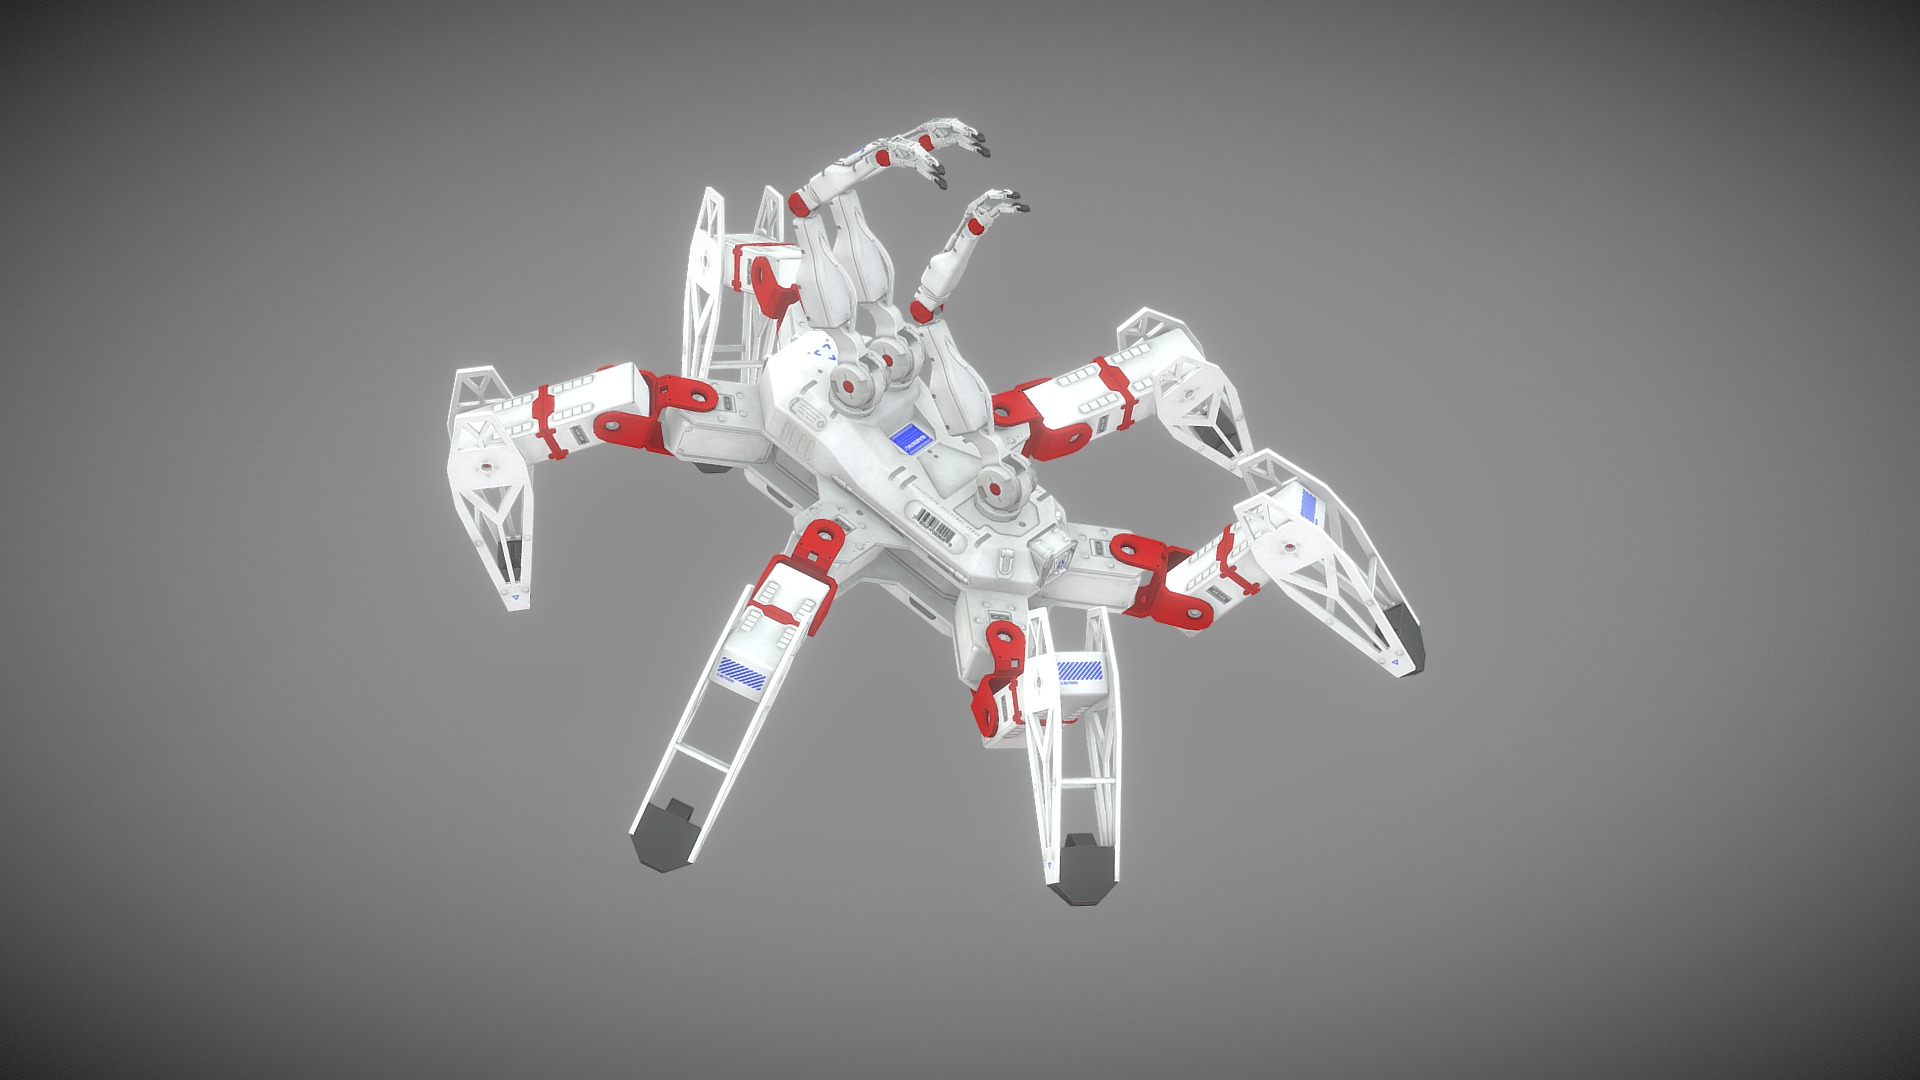 Nextgen Lab Drone: 4096x4096 Textures, Rigged Body, Full Animations Set, Game Ready.

Initially this model of assistant drone was developed by Lockhart Robotics and Eos Institute of Advanced Industrial Science and Technology, and since 65 A.R. it has been put to use by pharmaceutical companies, hospitals, universities, and other high tech offices of research and medical corporations. Like most other models of assistant drones, the Lab Assistant model can be piloted remotely by OS hub, works automatically in offline mode, and may be operated manually.

Part of the robot's appeal is its highly intricate and adaptable functions. The Lab Assistant Drone was designed to do anything people can do, so it doesn't require a special set of tools, and it's not limited to a small set of tasks. Beyond that, Lab Assistant Drones are relatively easily programmed and possess the capability of &ldquo;cloud intelligence synchronization